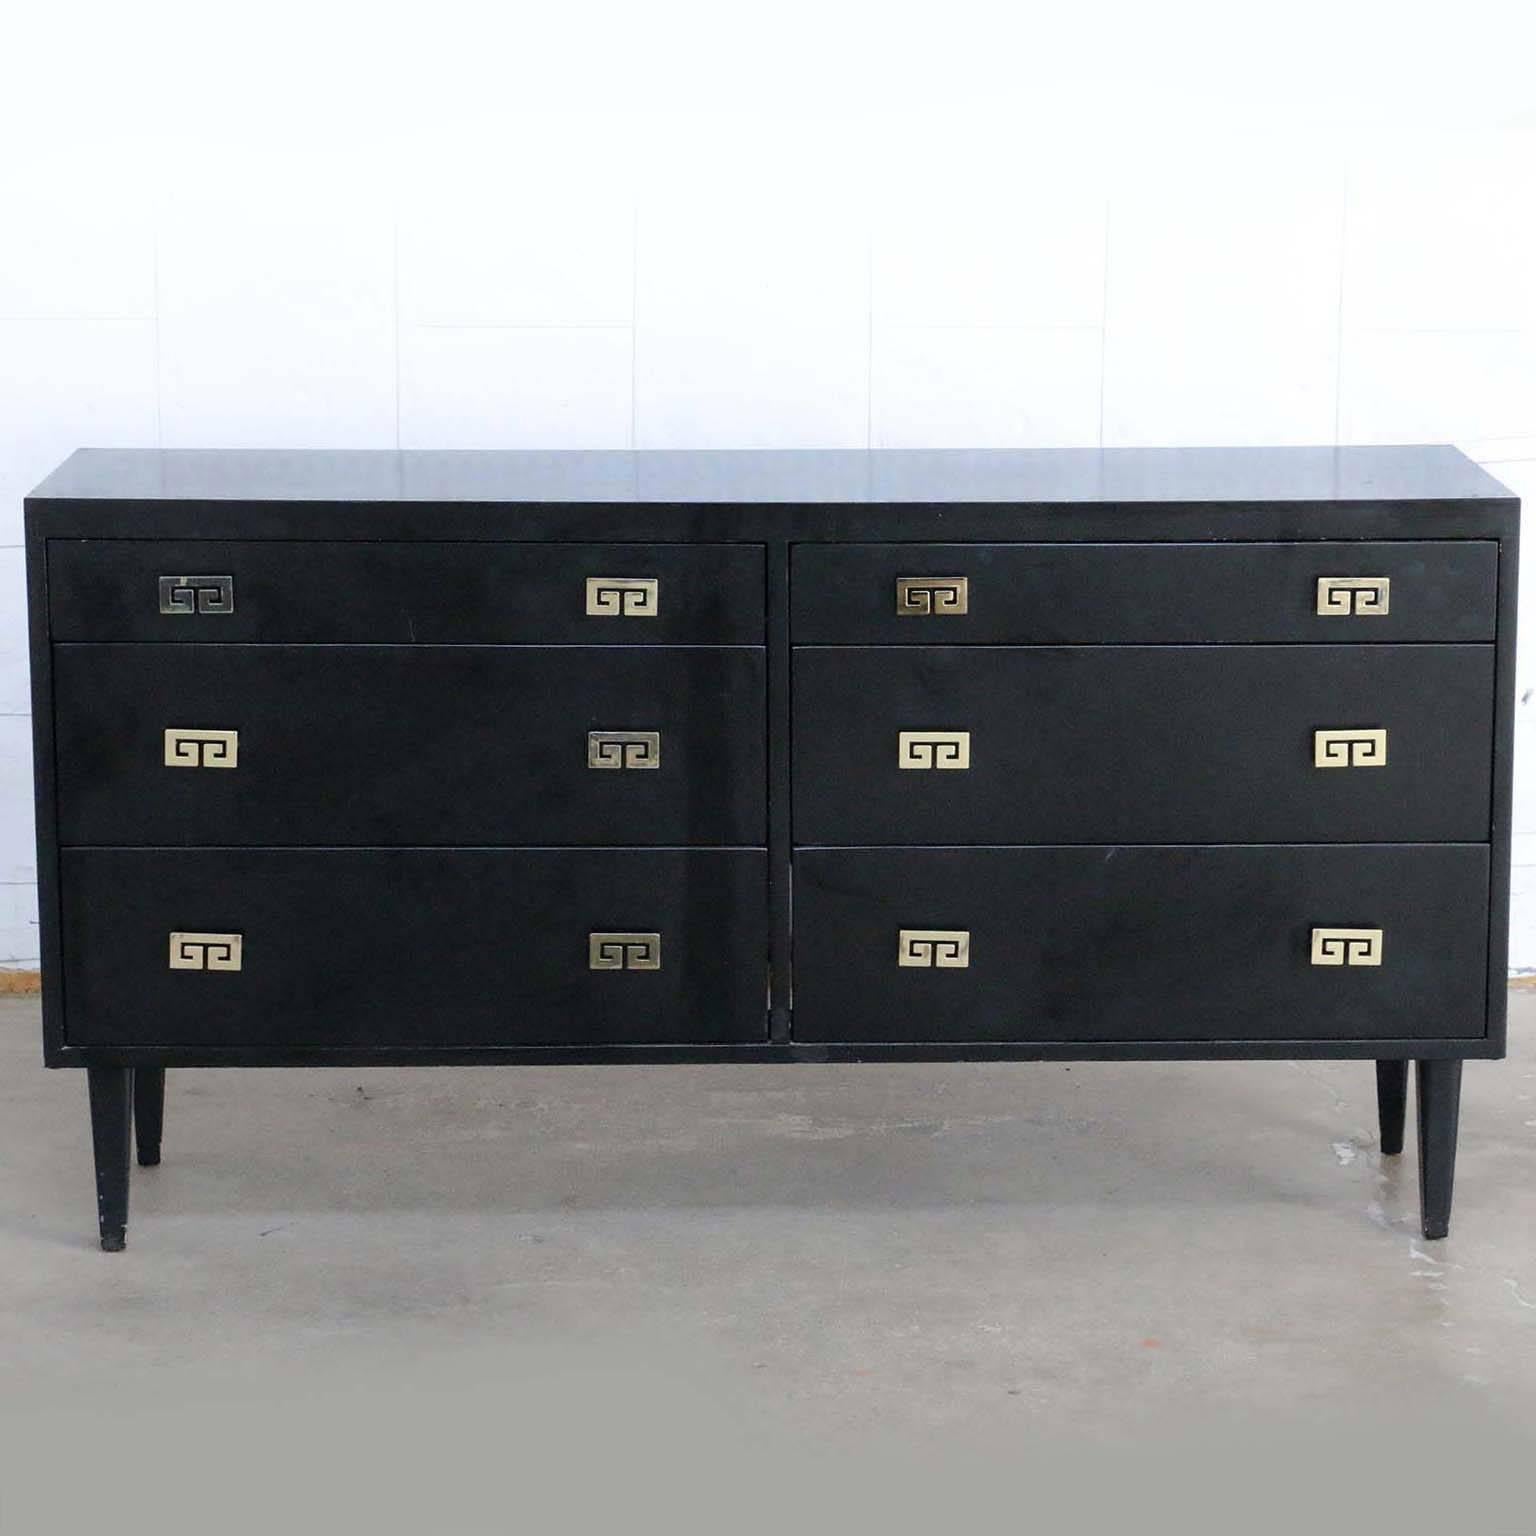 Elegant Mid-Century Modern ebonized six-drawer dresser or chest of drawers made in the manner or style of James Mont. Produced by Woodland of California featuring a black finish with decorative brass metal pulls with a Greek key motif. The dresser